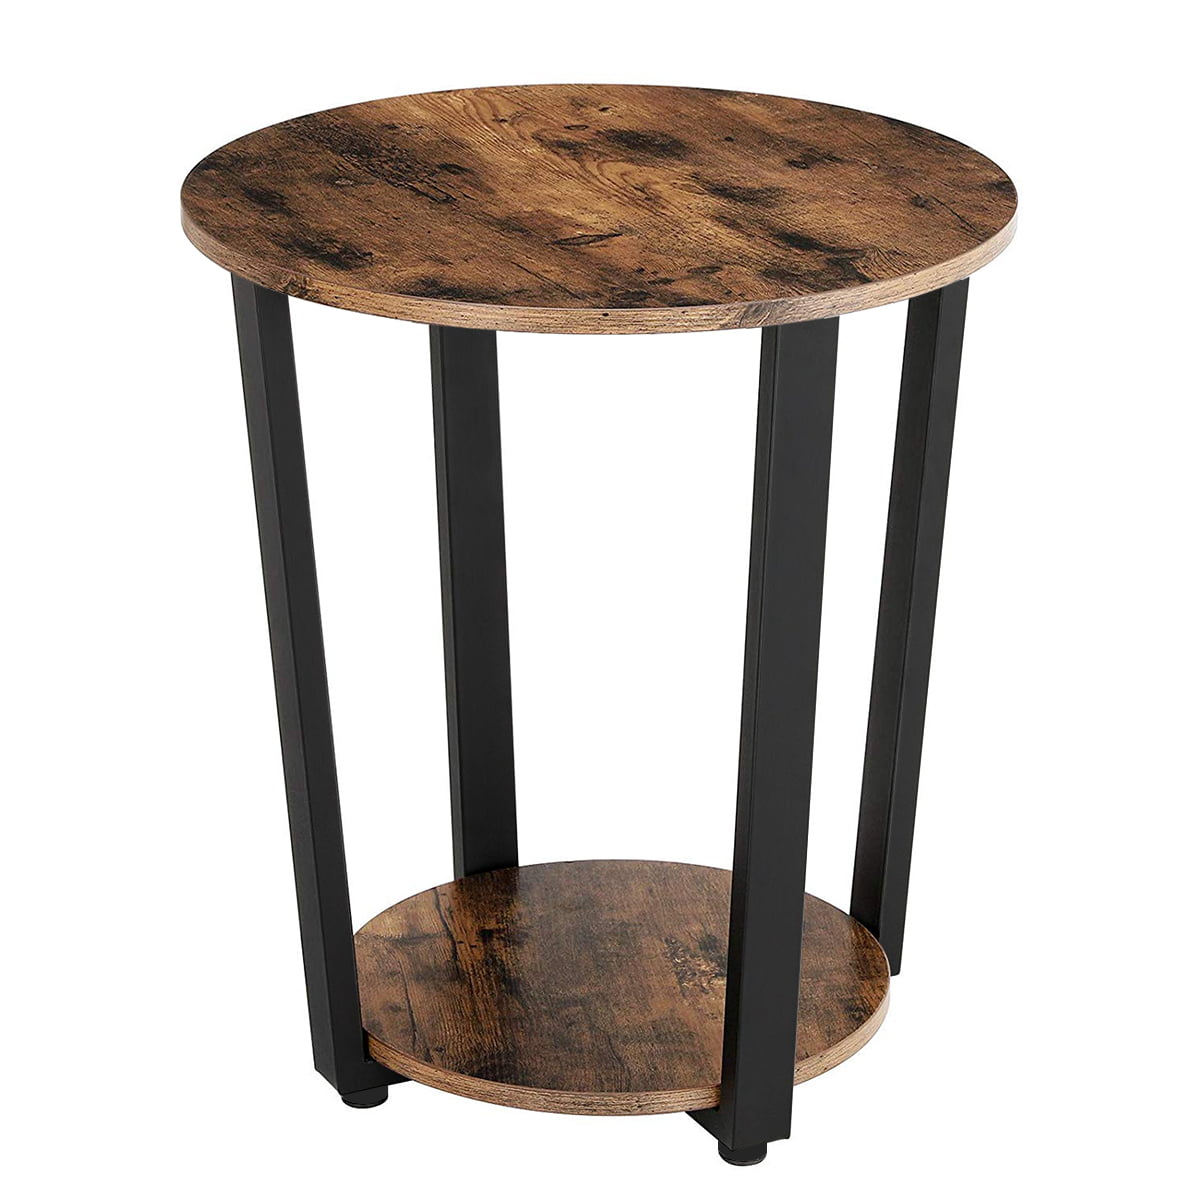 Novashion End Table Sofa Side Table, 2-Tier Industrial Round Coffee